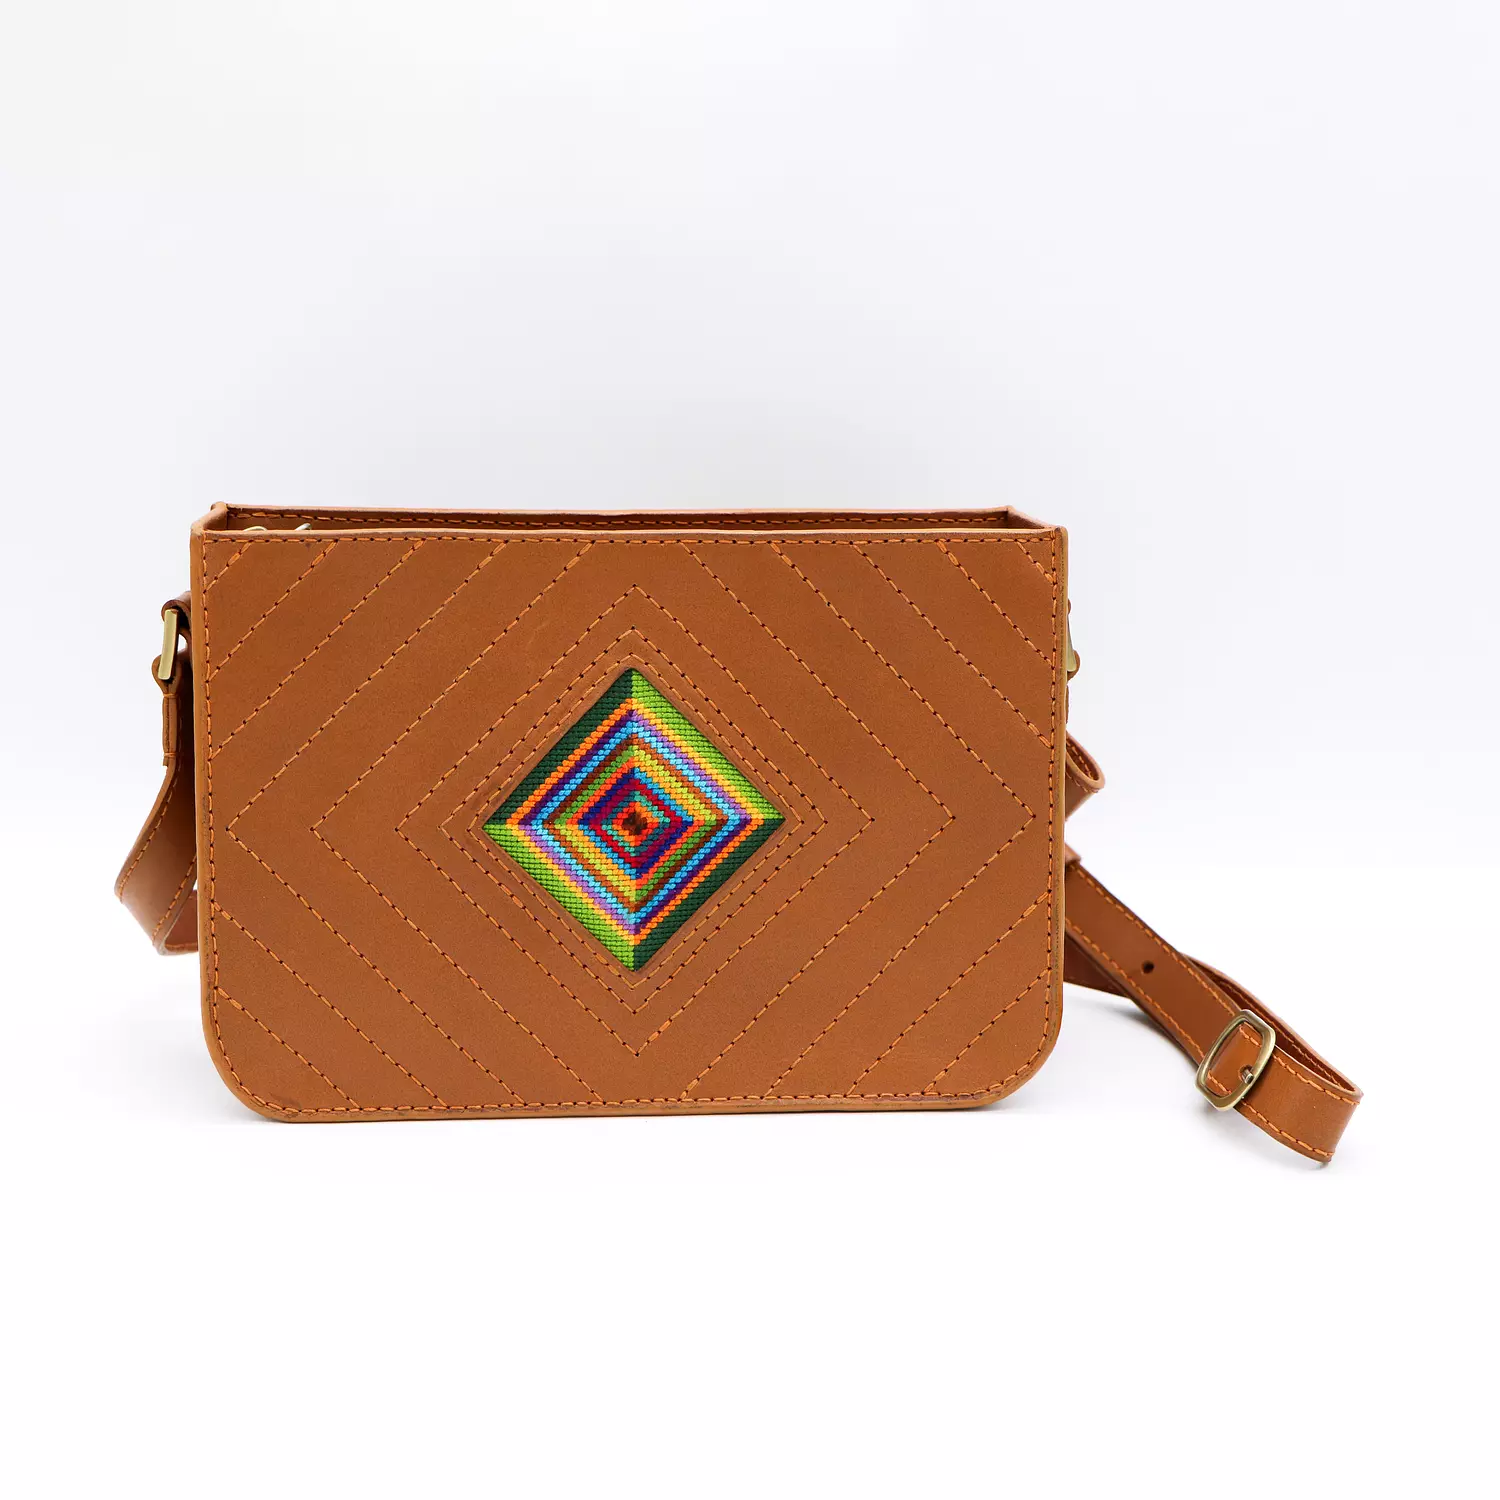 Genuine leather bag with colorful Cross-stitching hover image